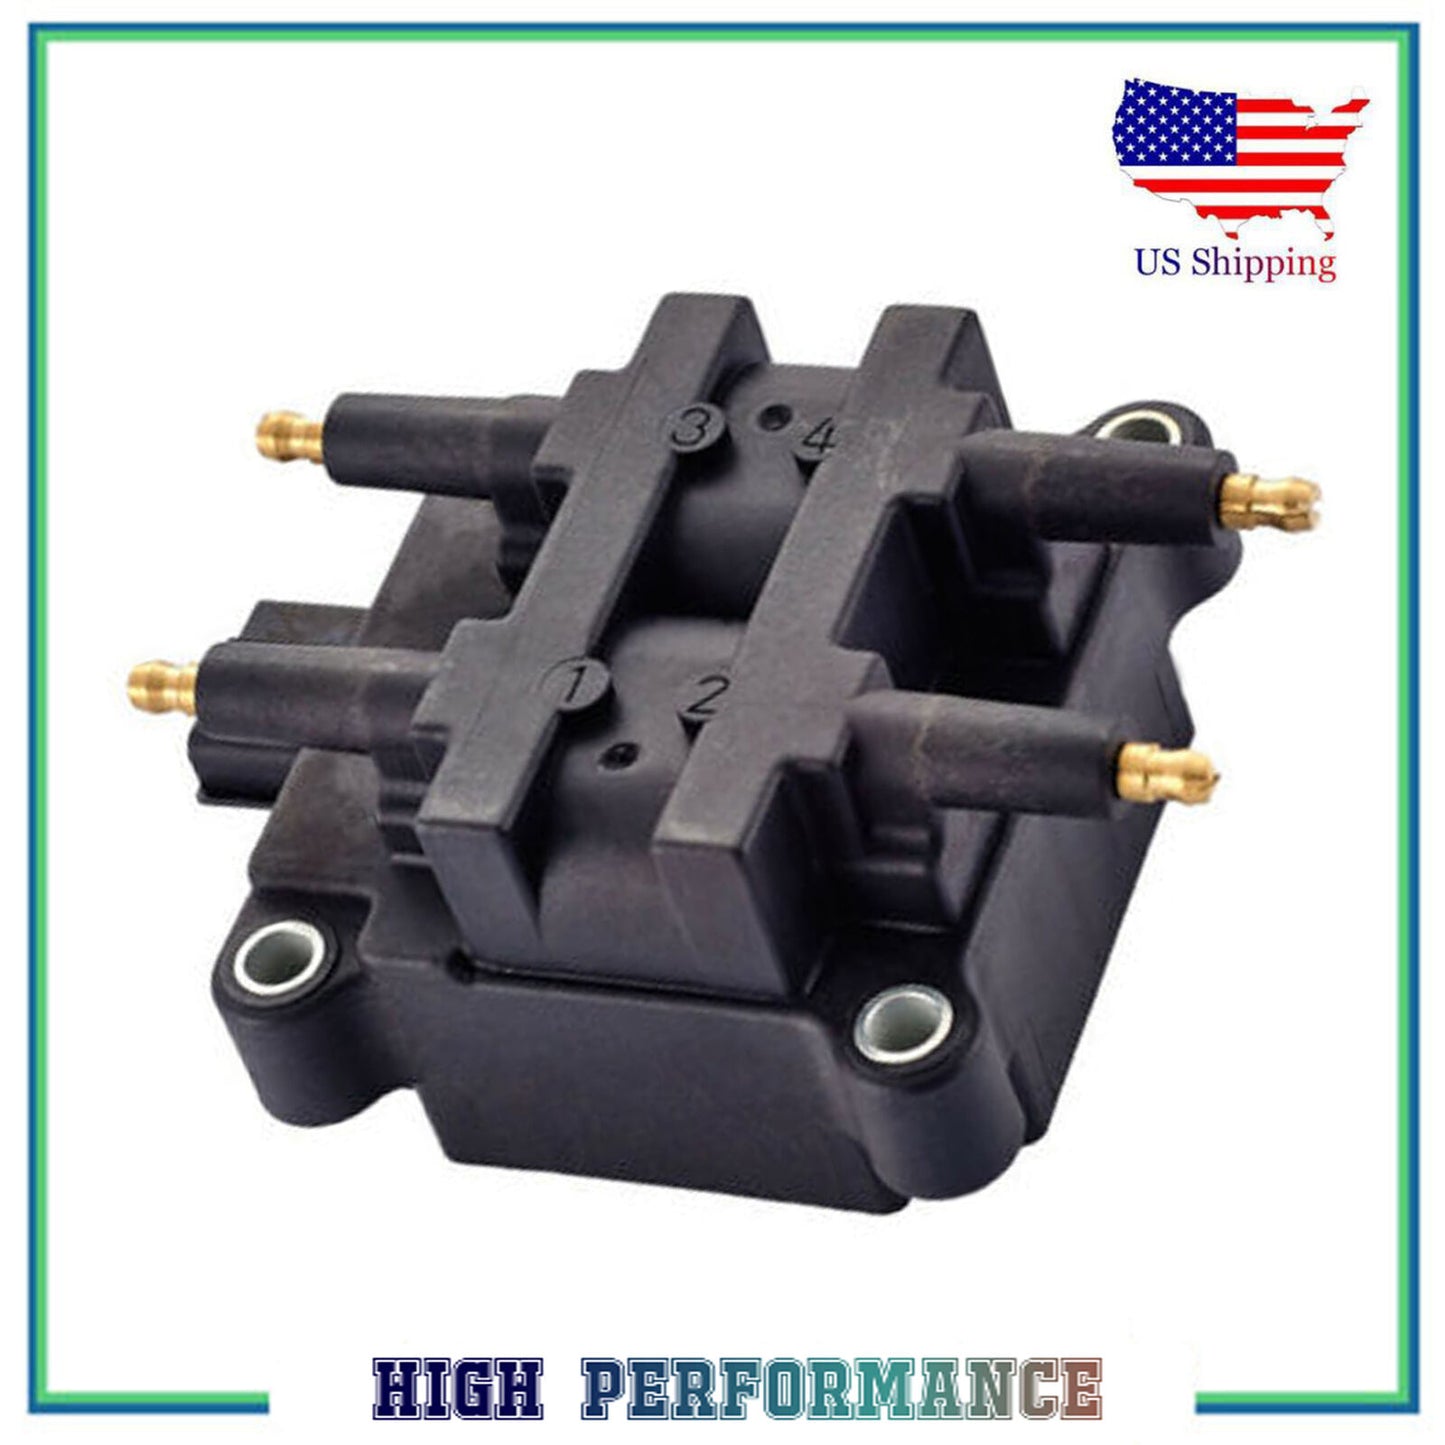 New Ignition Coil For UF240 Subaru Legacy Impreza Forester Outback Baja 2.2 2.5L